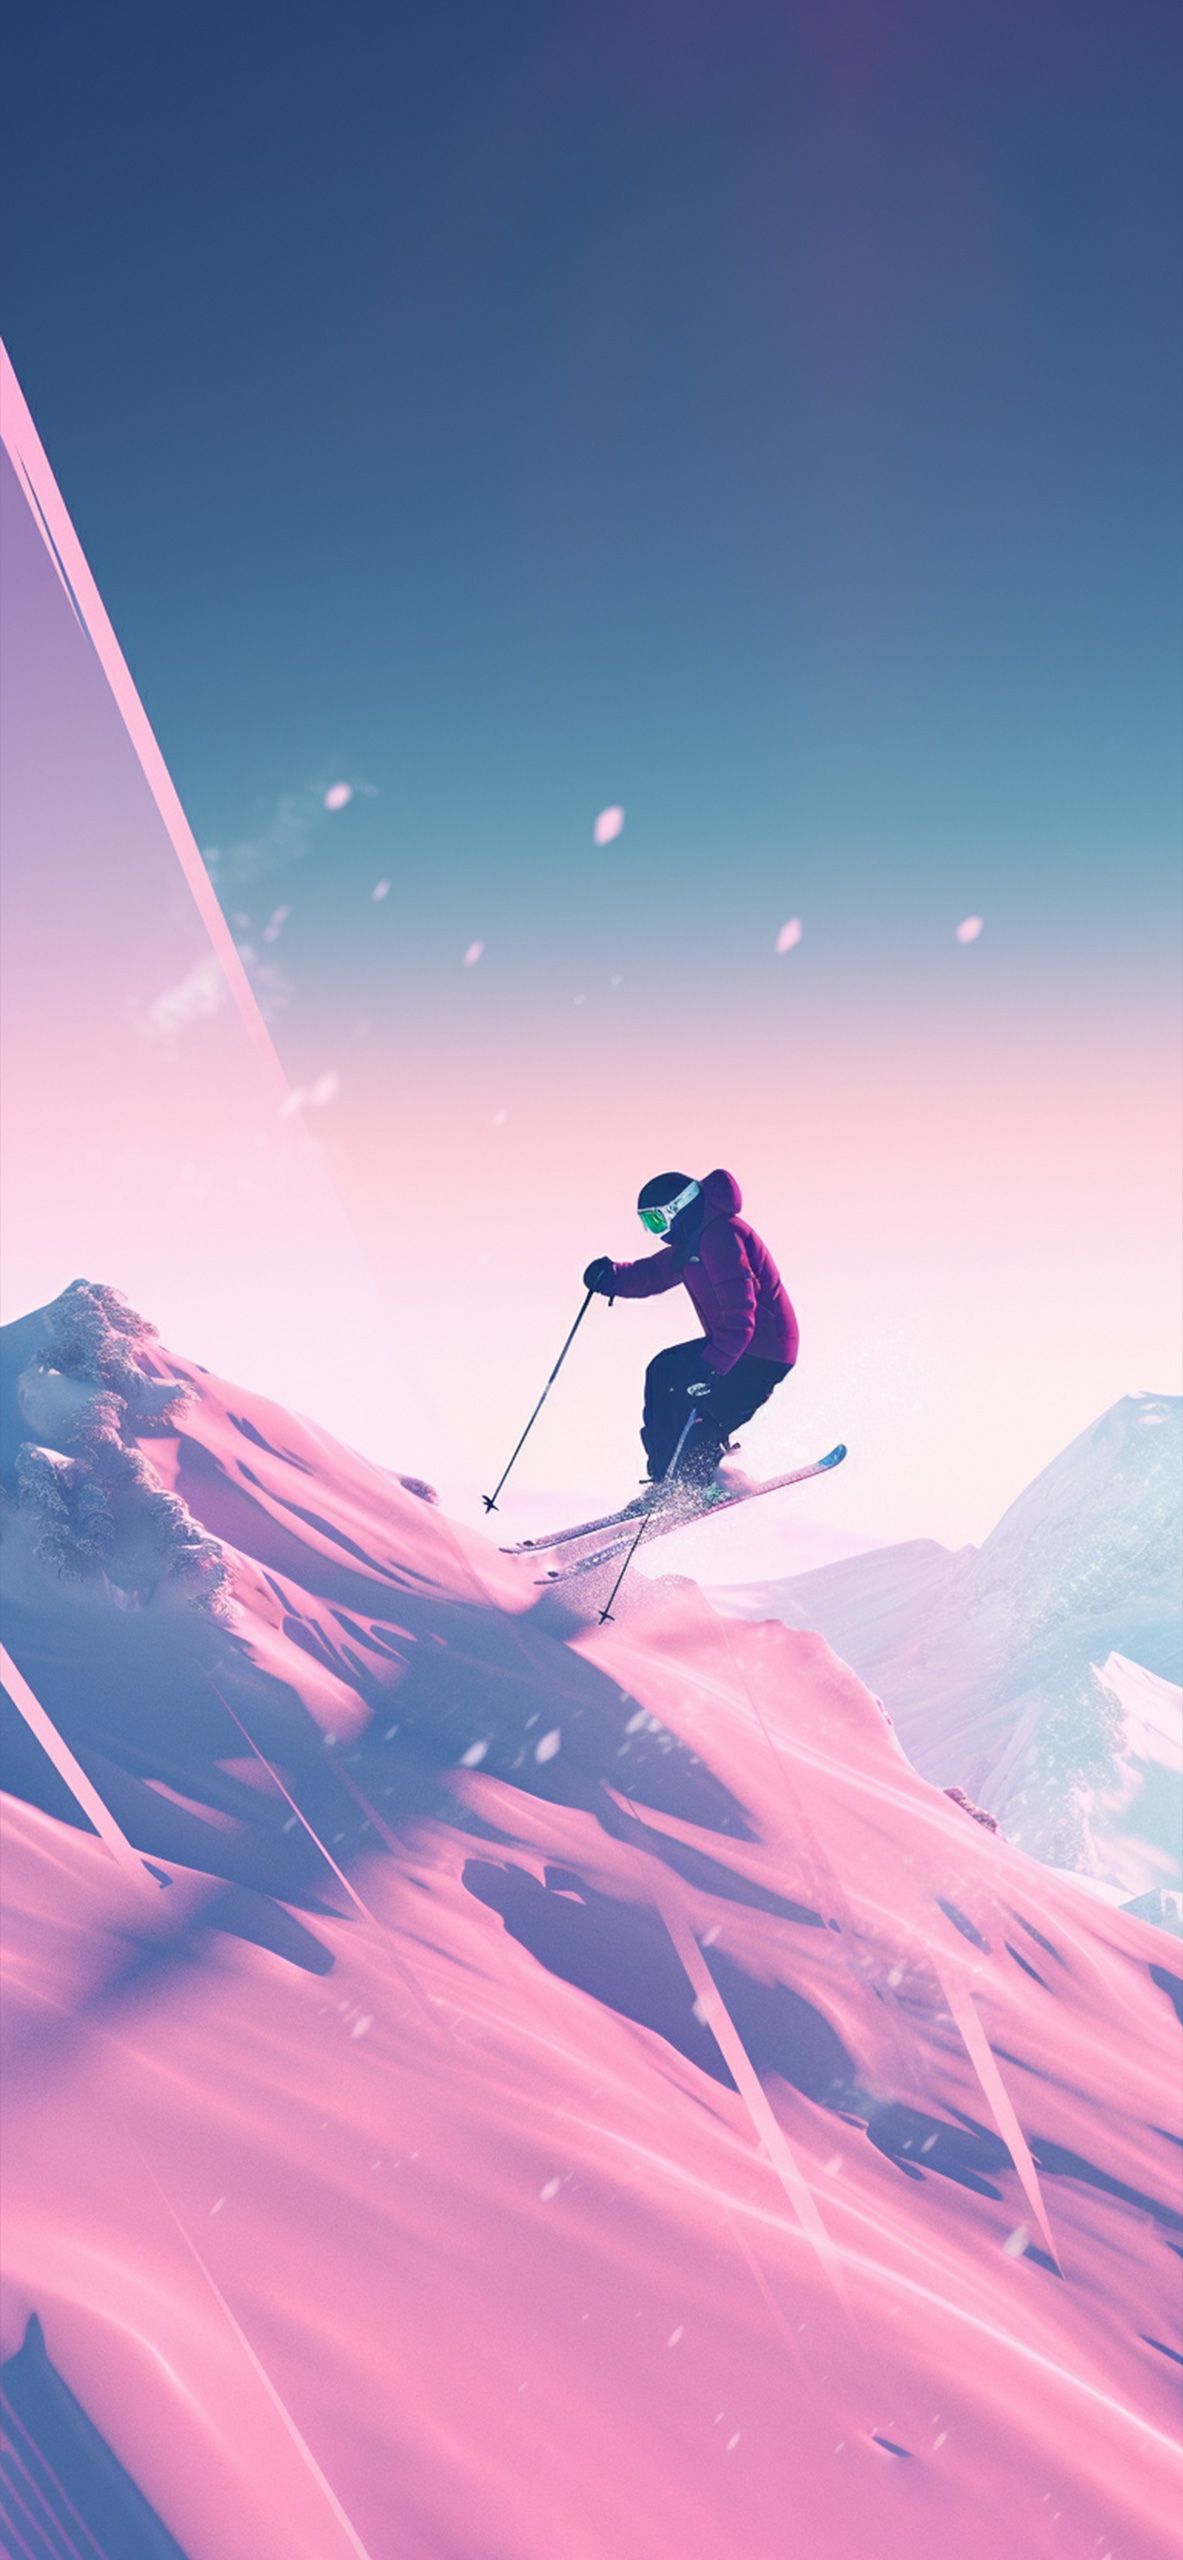 Skiing Down the Mountain Wallpaper Wallpaper for iPhone